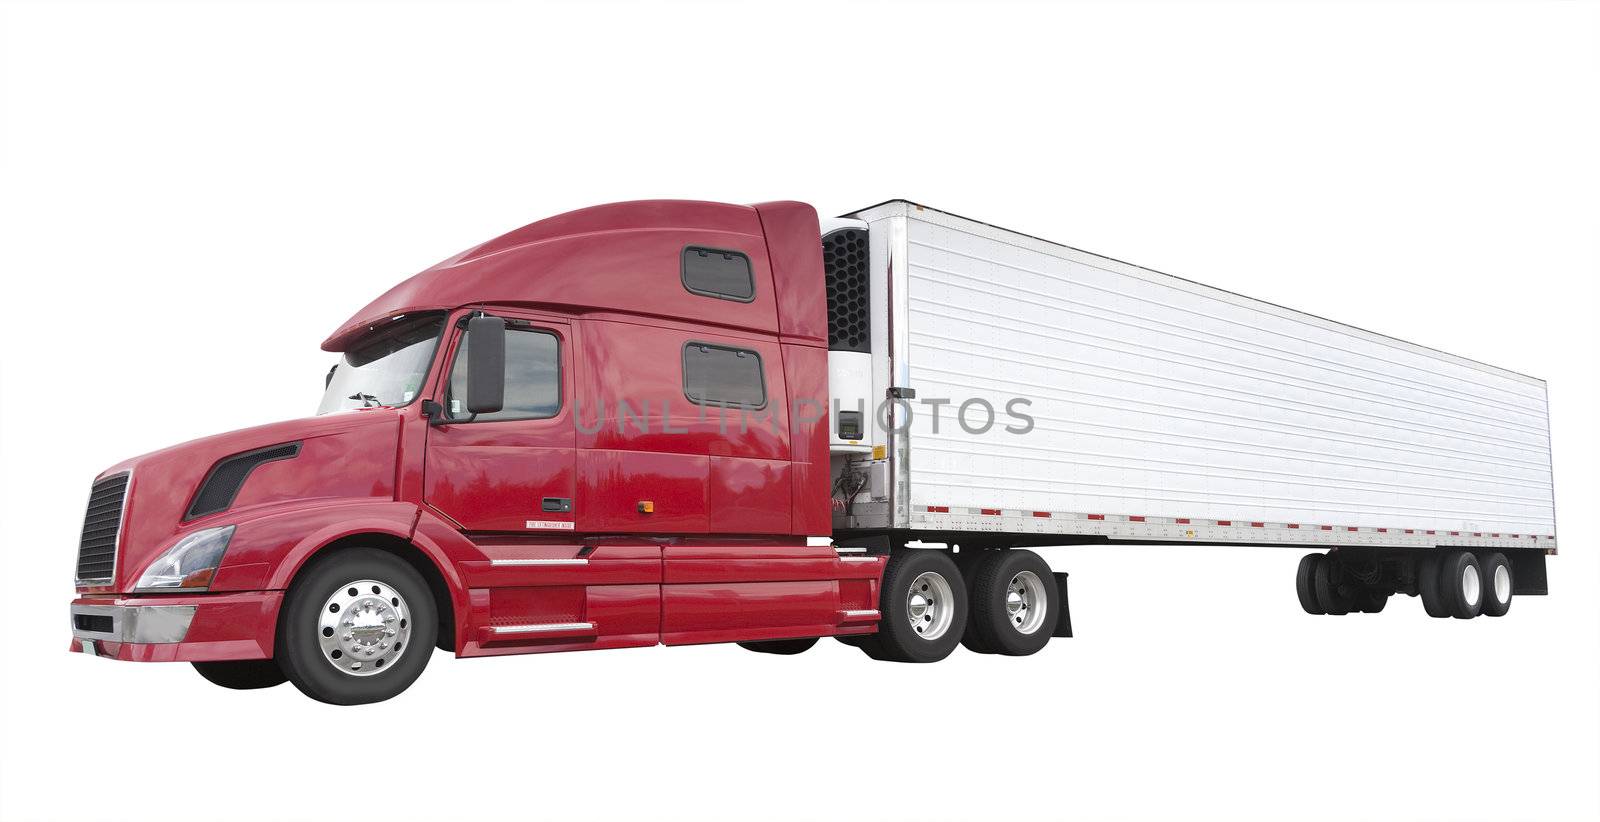 Big semi trailer truck used for carrying freight